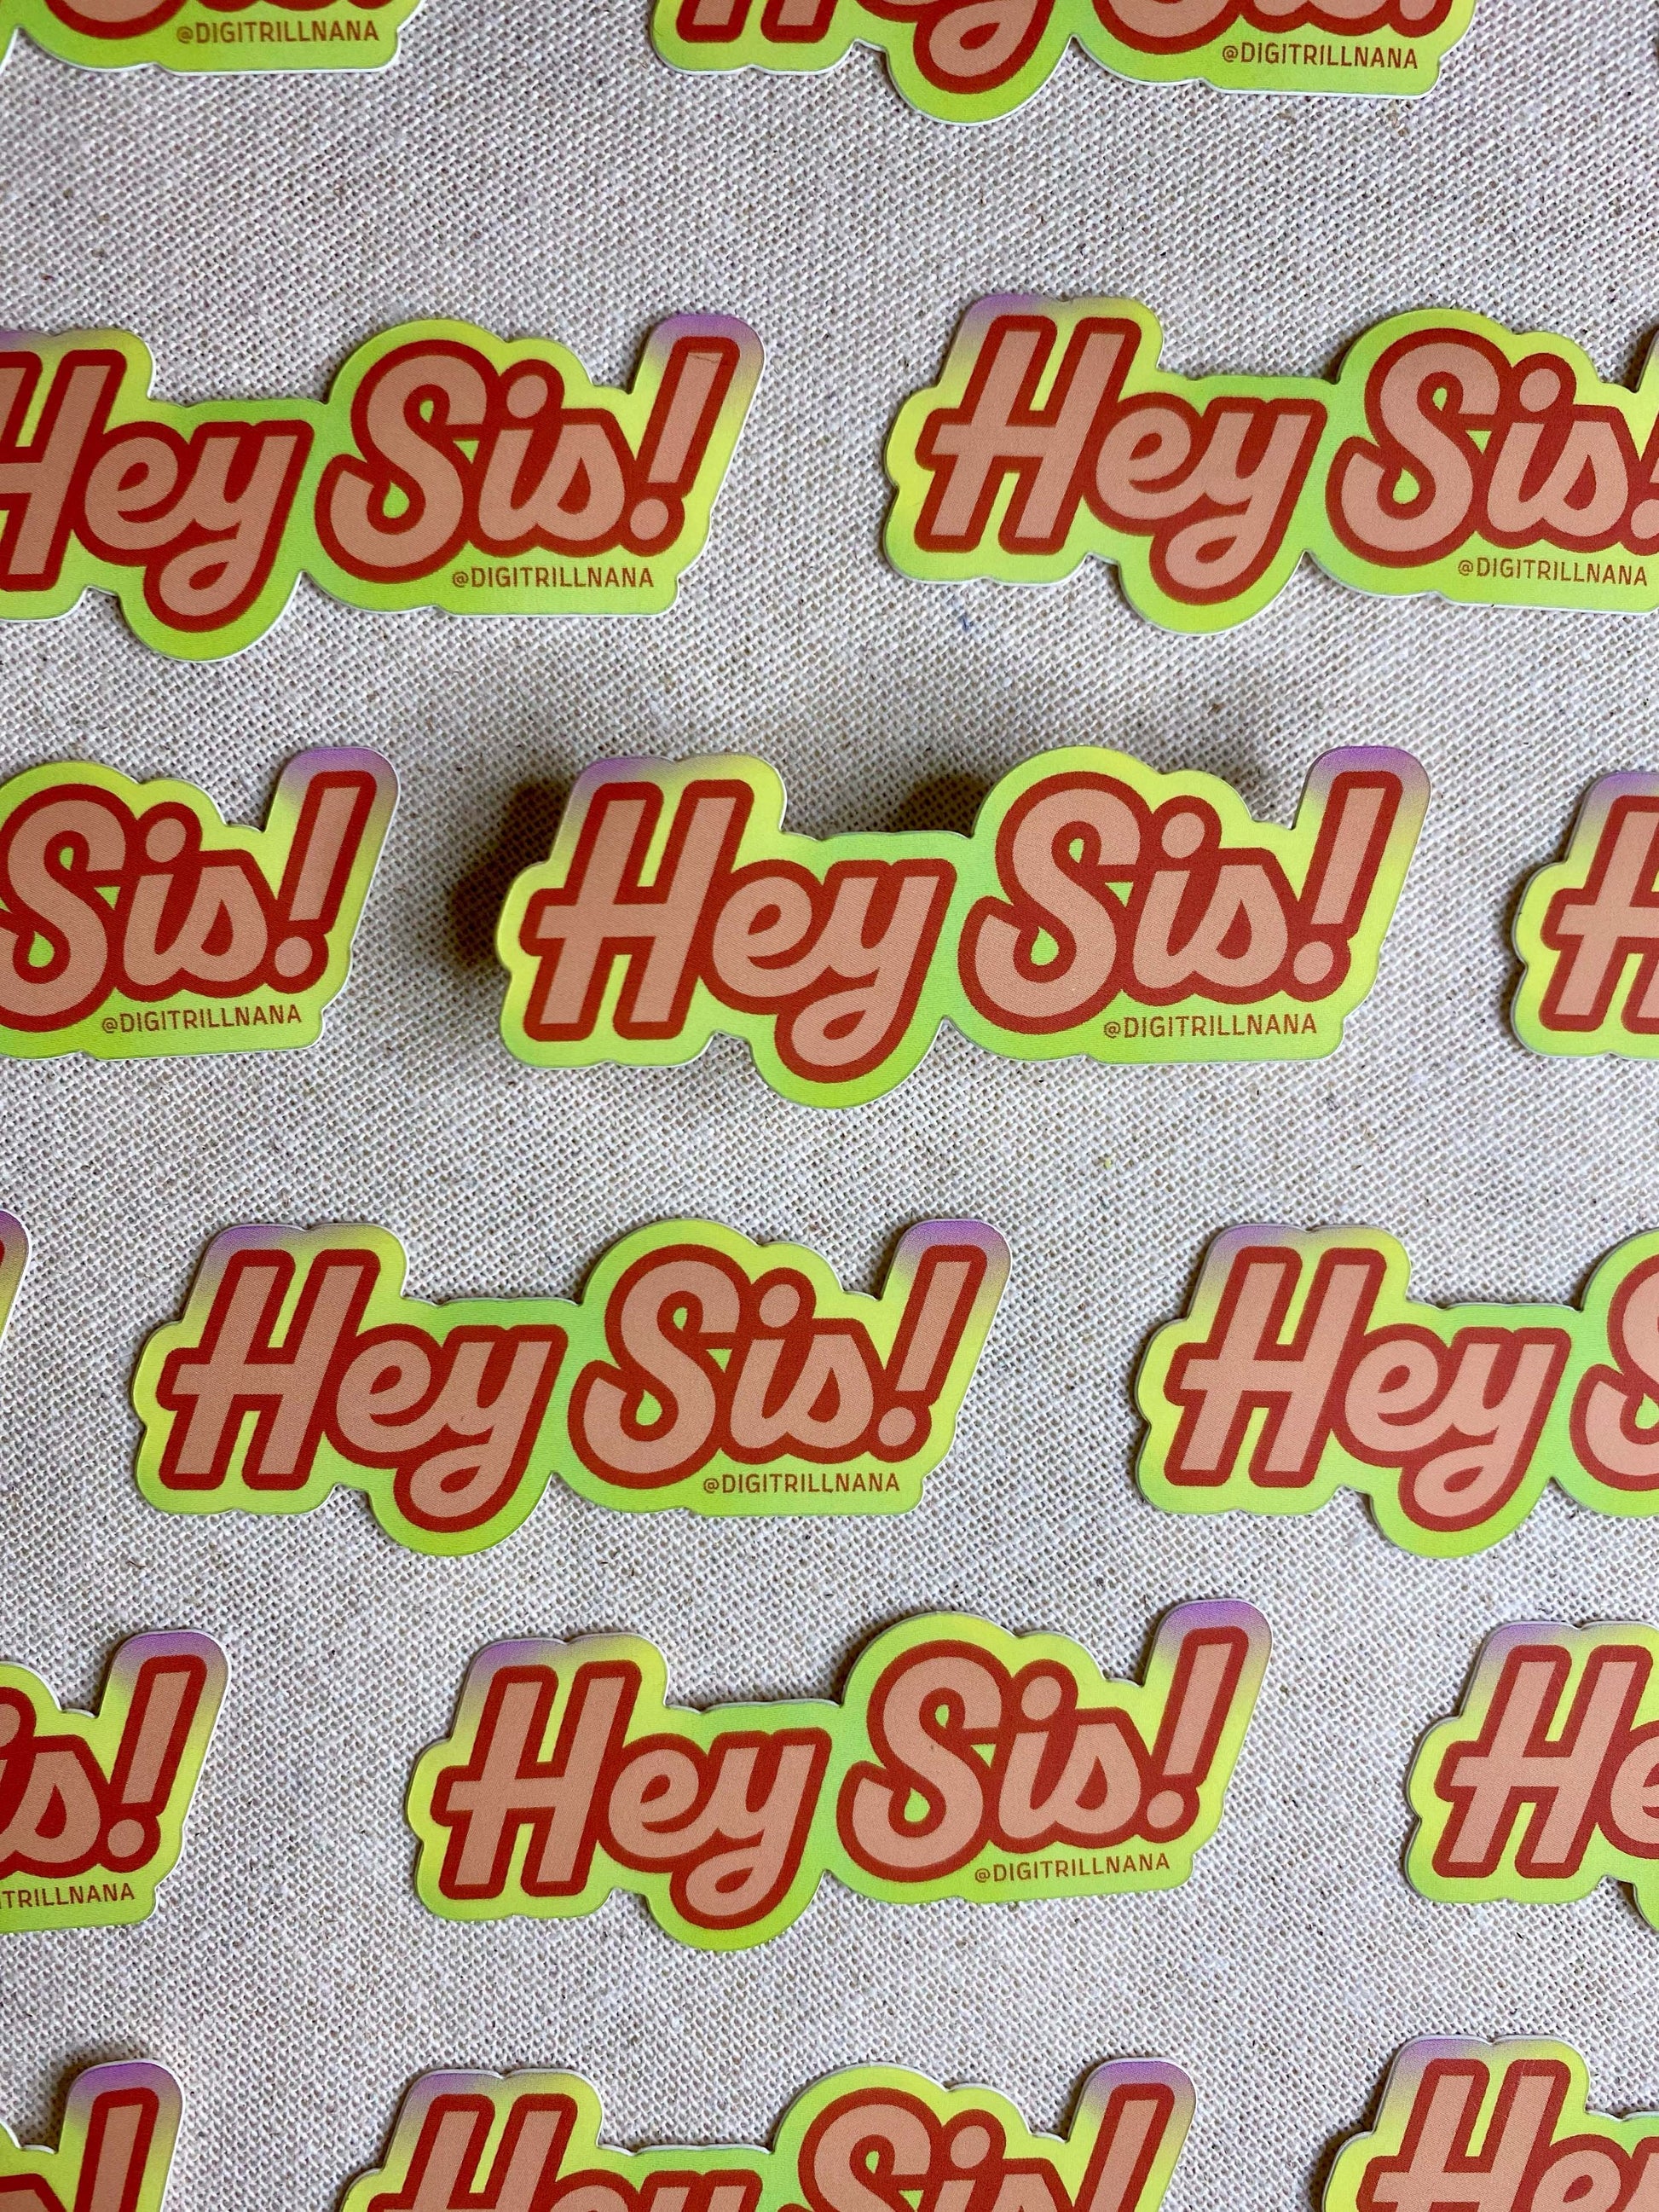 Hey Sis gradient, pink green, crimson yellow high quality vinyl waterproof and scratch resistant sticker from Goods Made By Digitrillnana, Ashley Fletcher. Delta Sigma Theta Sorority, Alpha Kappa Alpha Sorority. Black Woman Owned.